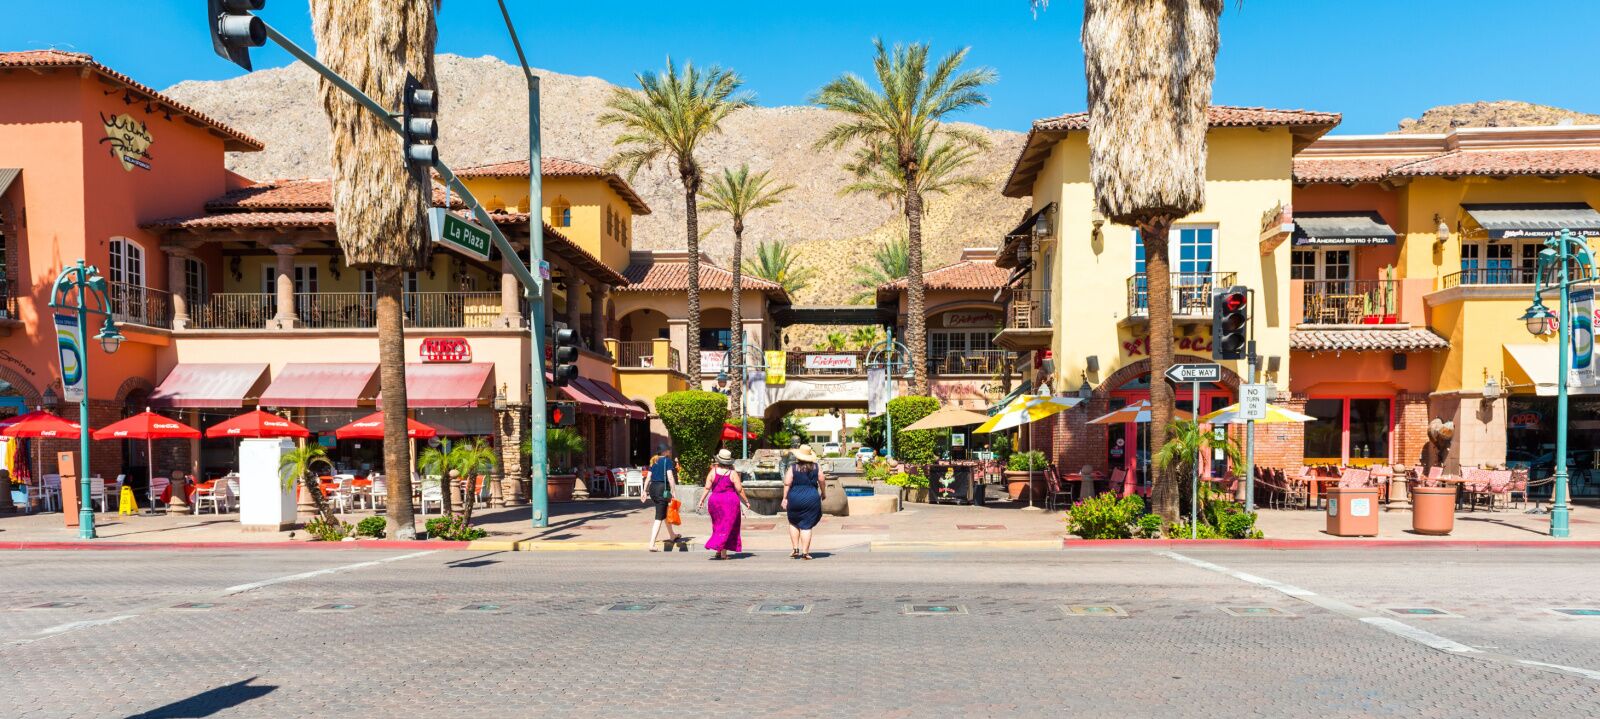 Palm springs vacation rentals - shot of people downtown